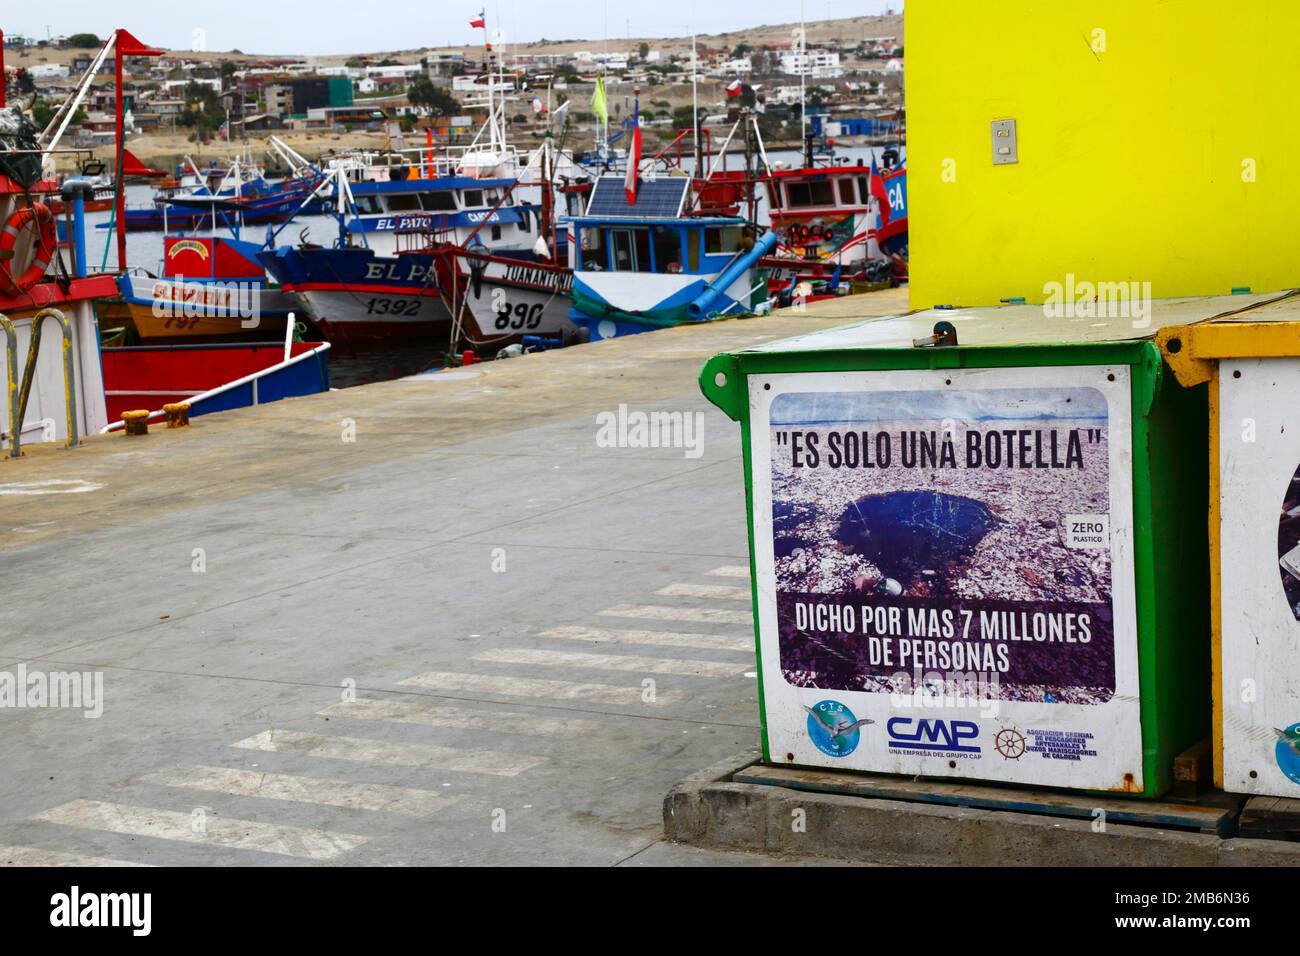 Sign in fishing docks encouraging people and fishermen not to throw plastic bottles into the sea, Caldera, Chile. The Spanish translates as 'It's only one bottle, said more than 7 million people'. Stock Photo